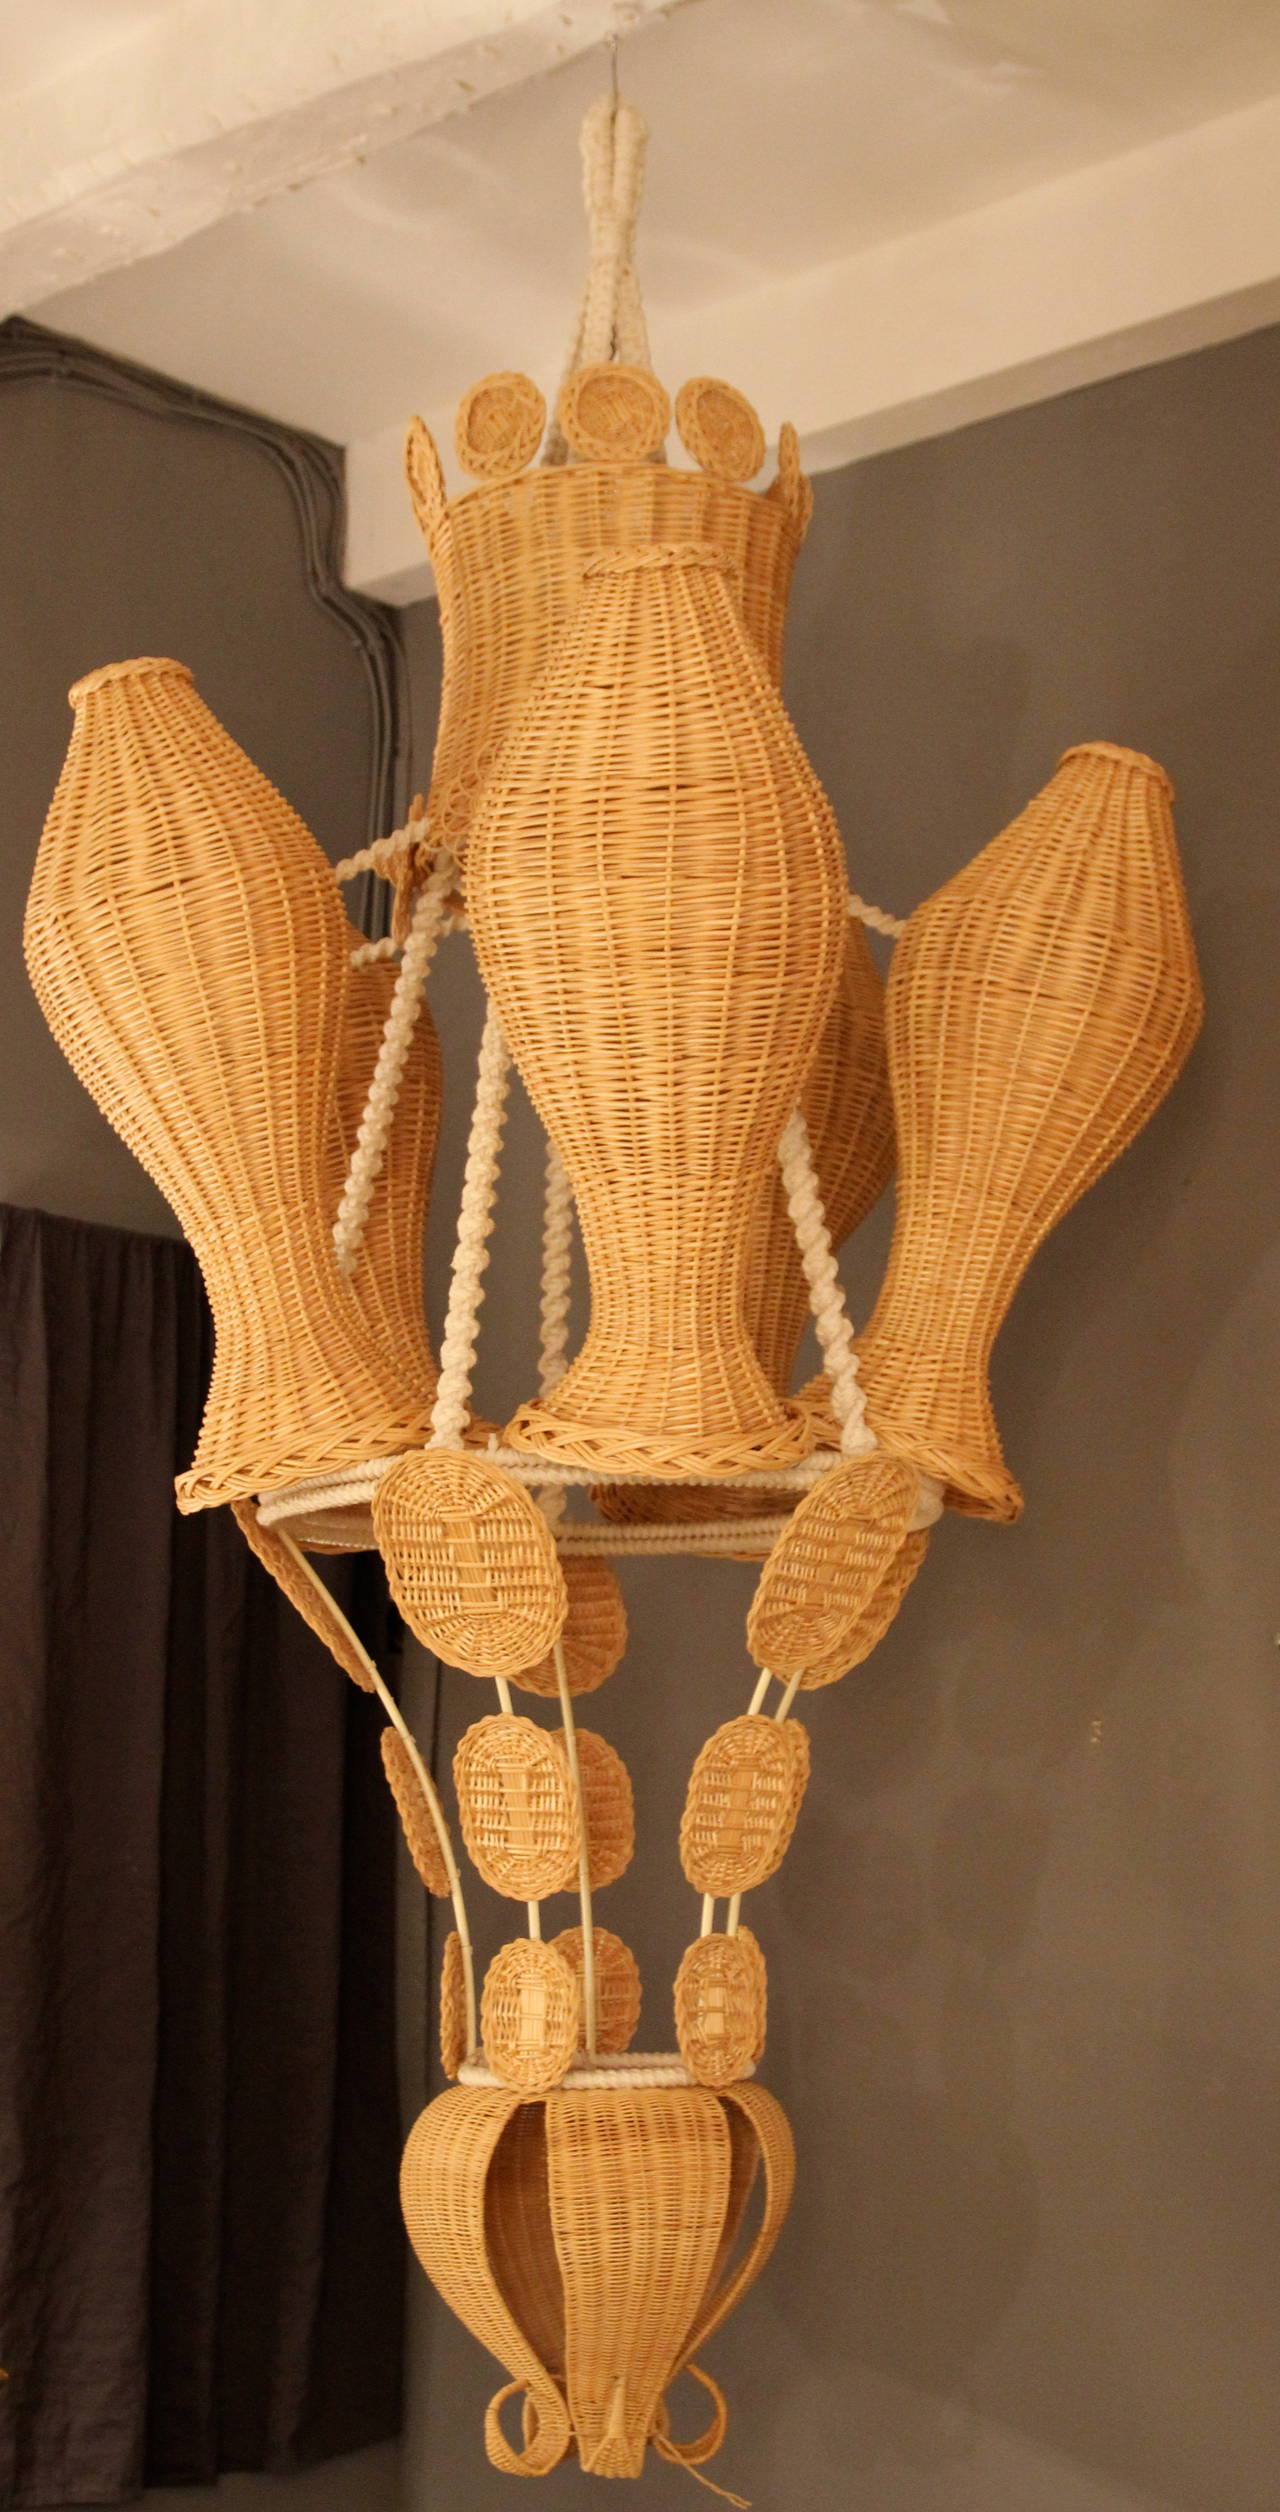 Santi Moix (1961), luster sculpted.
Wicker, rope and iron, circa 2000, Spain.
Measures: Height: 220 cm, diameter: 110 cm.